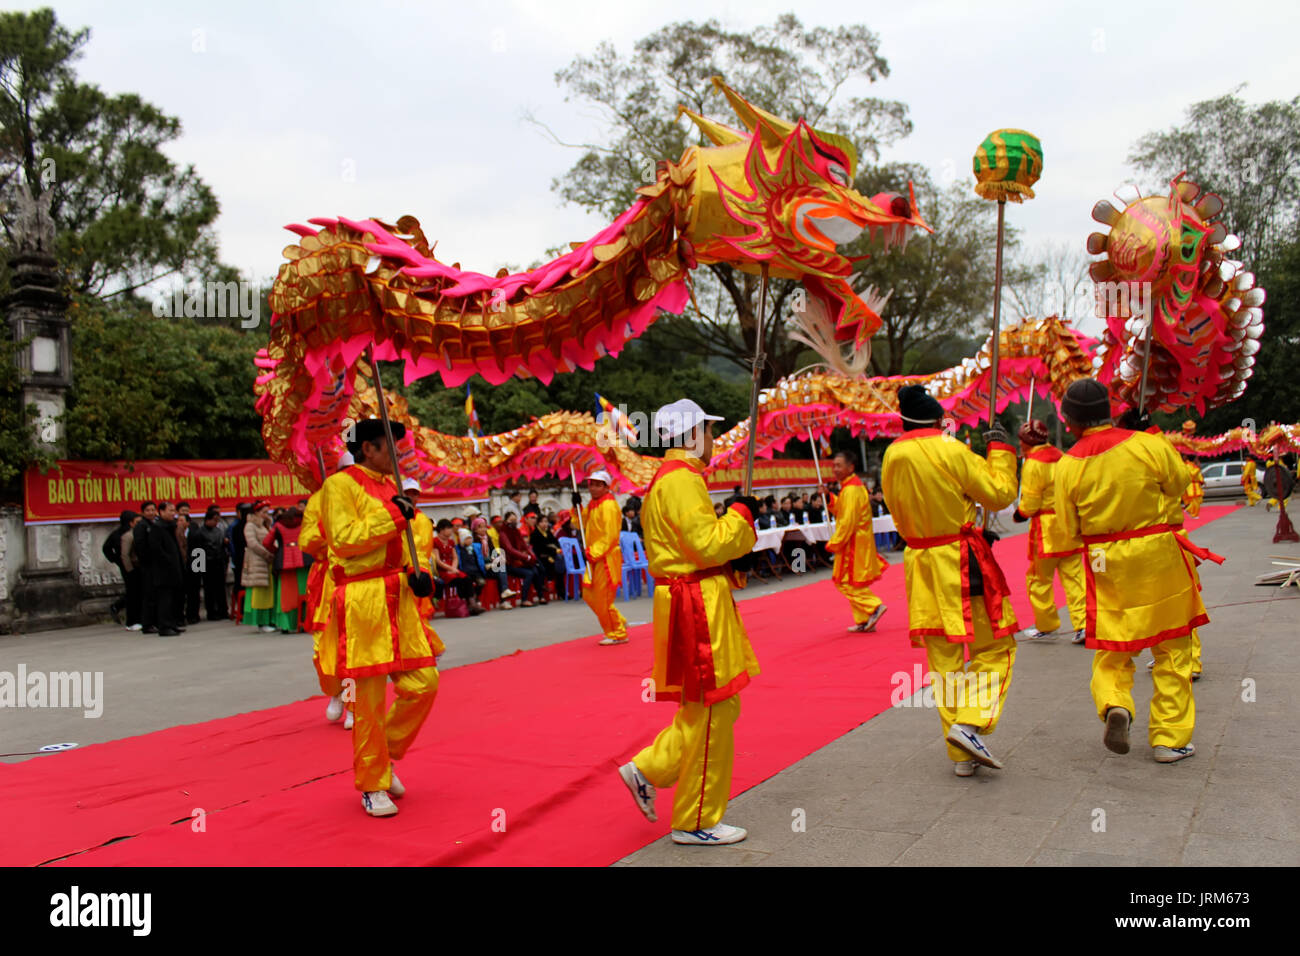 HAI DUONG, VIETNAM, February 14: a group of Asian people dance dragon in folk festivals on February 14, 2014 in Con Son pagoda, Hai Duong, Vietnam. Stock Photo